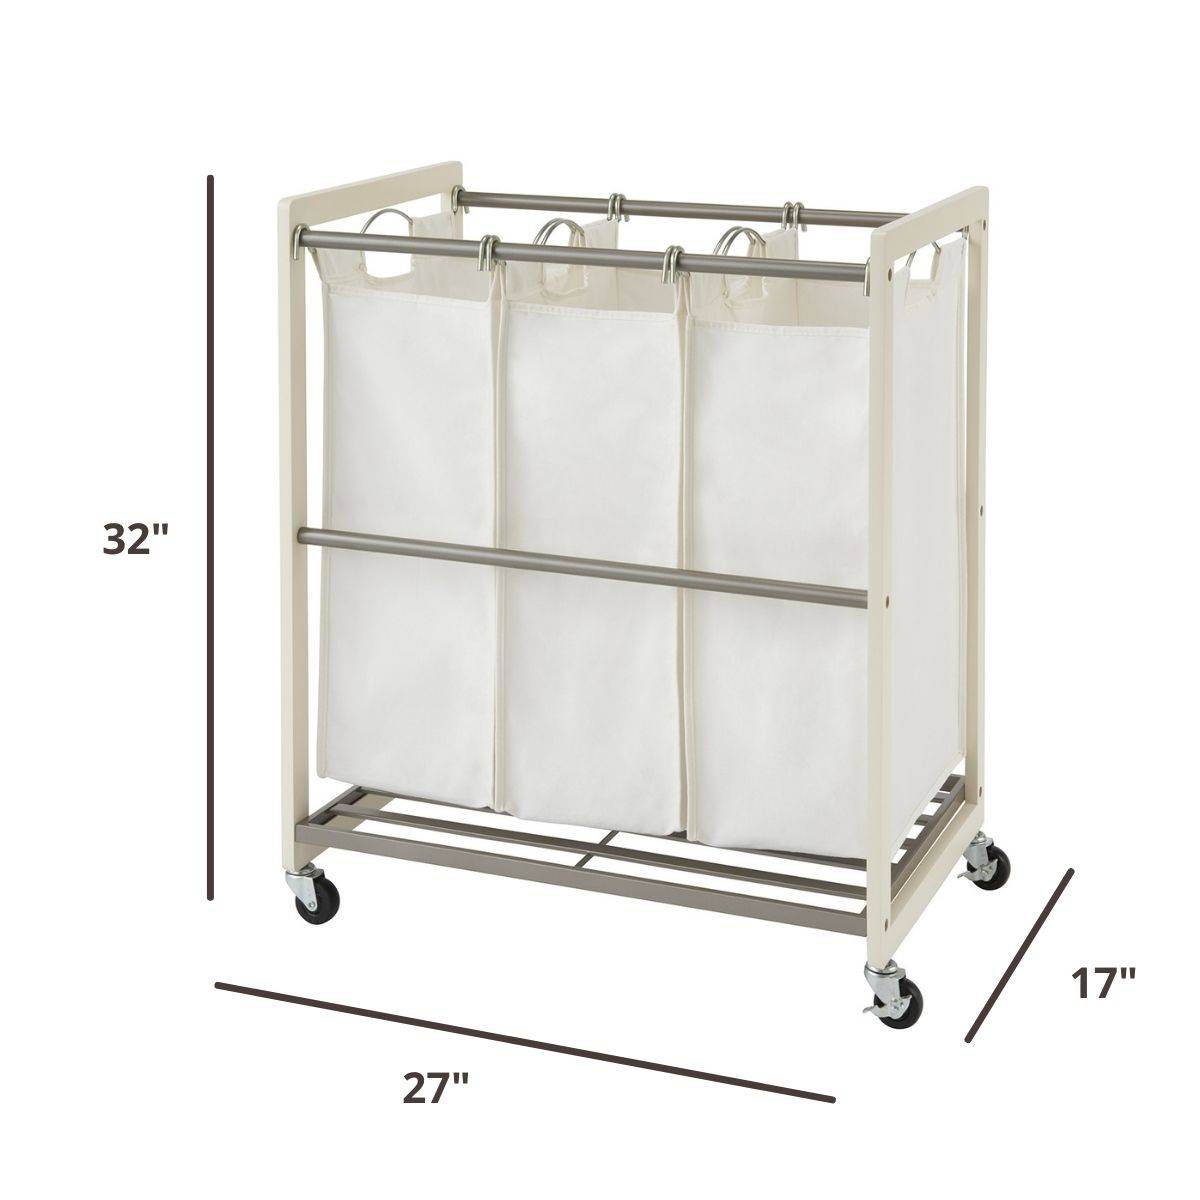 32 inches tall by 27 inches wide by 17 inches deep white laundry organizer